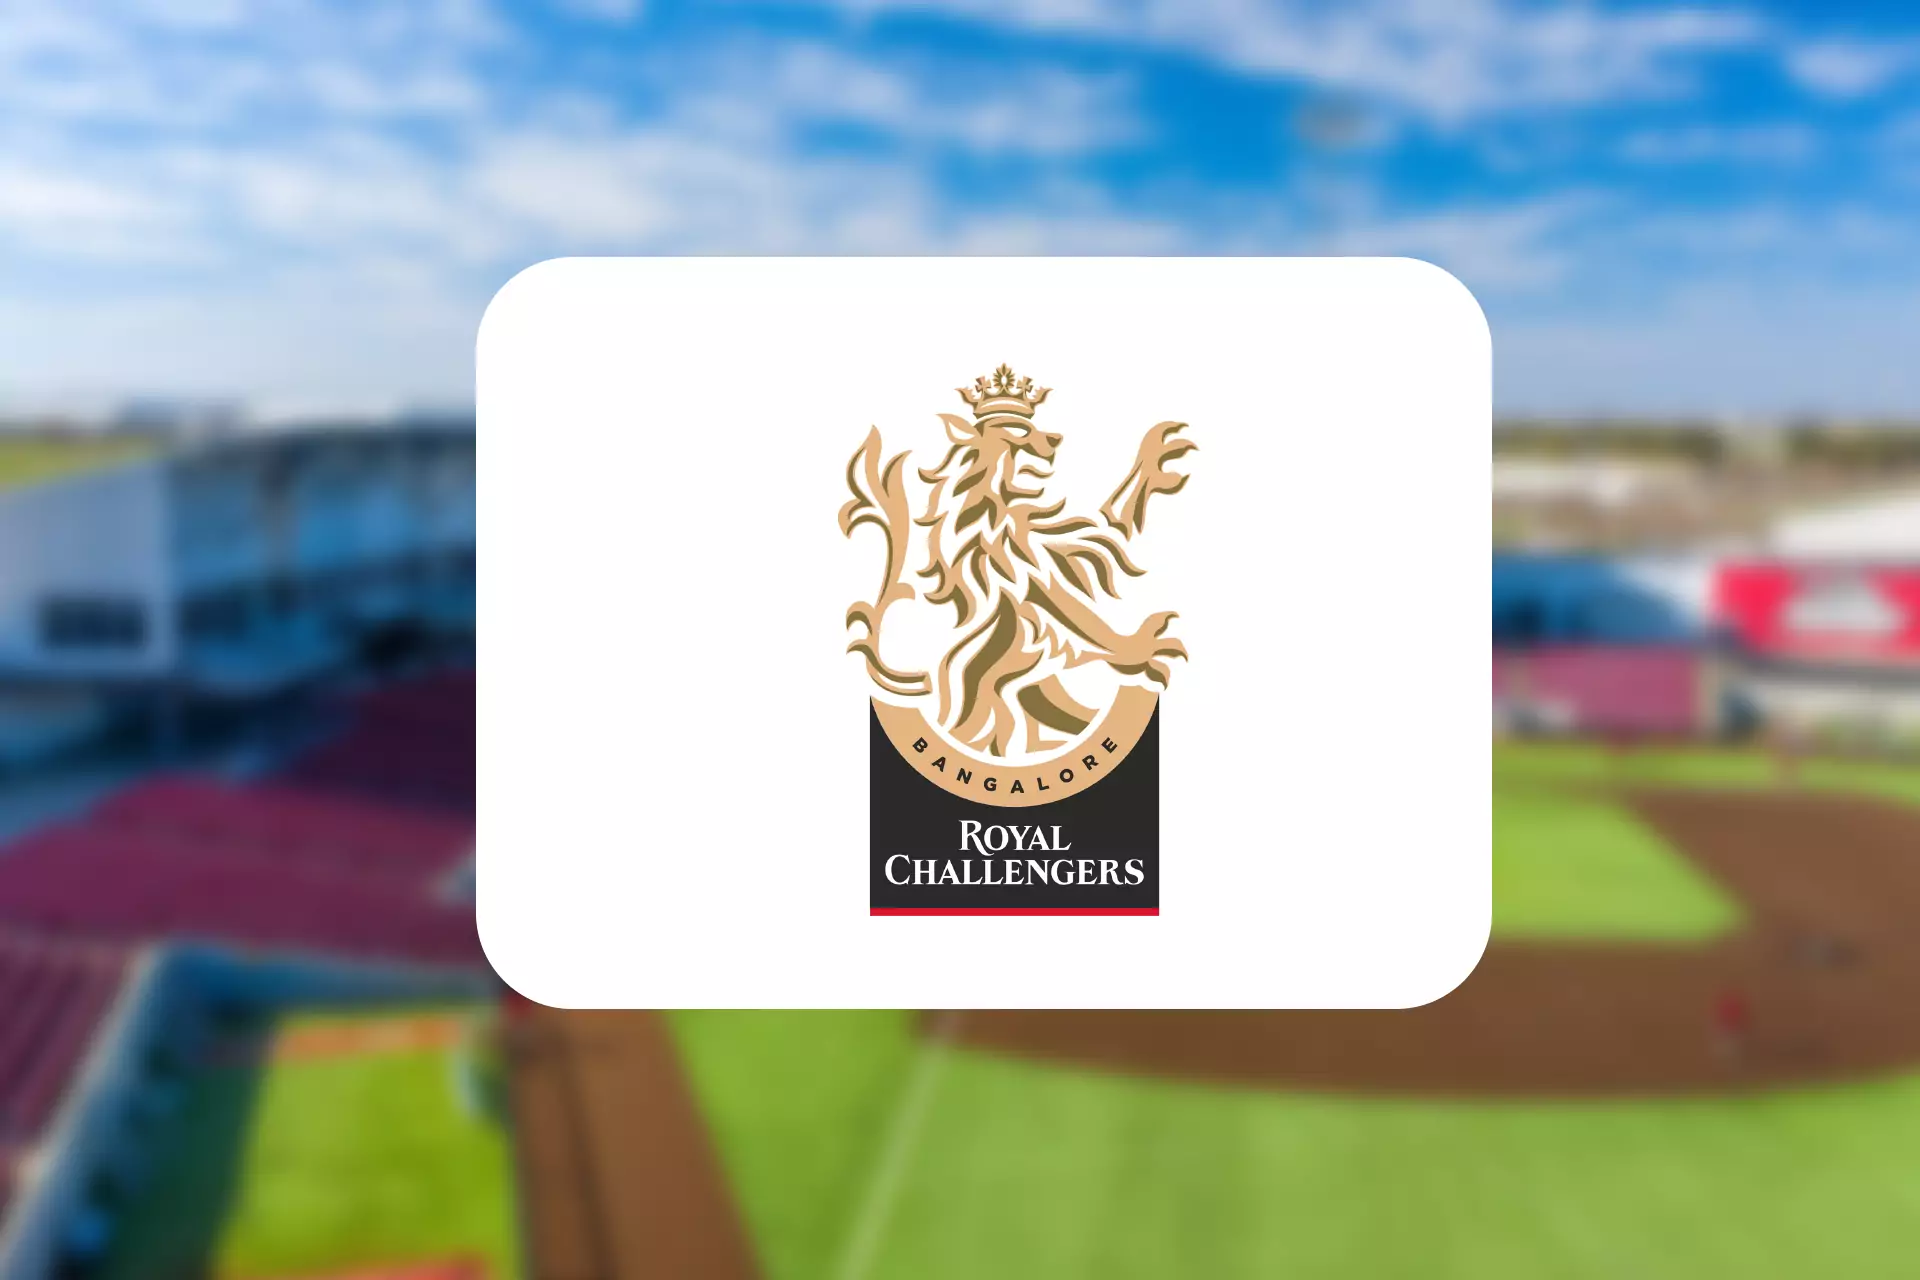 The Royal Challengers Bangalore team holds the records for both the highest and lowest totals in the IPL.